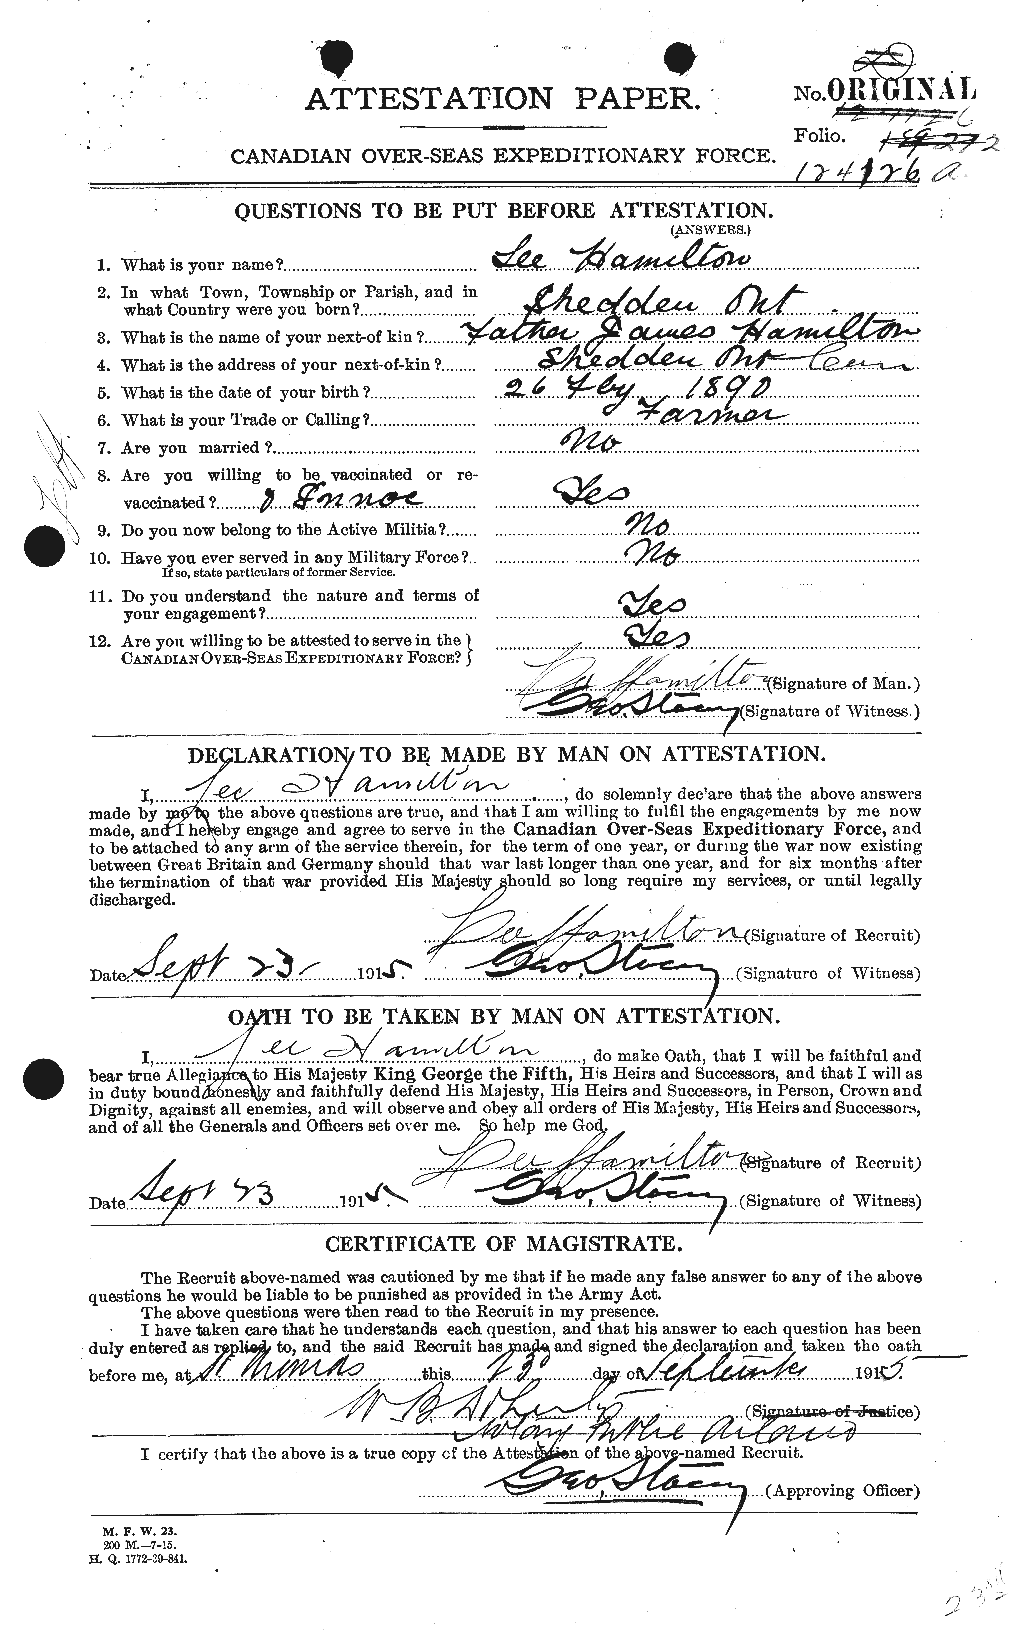 Personnel Records of the First World War - CEF 373158a